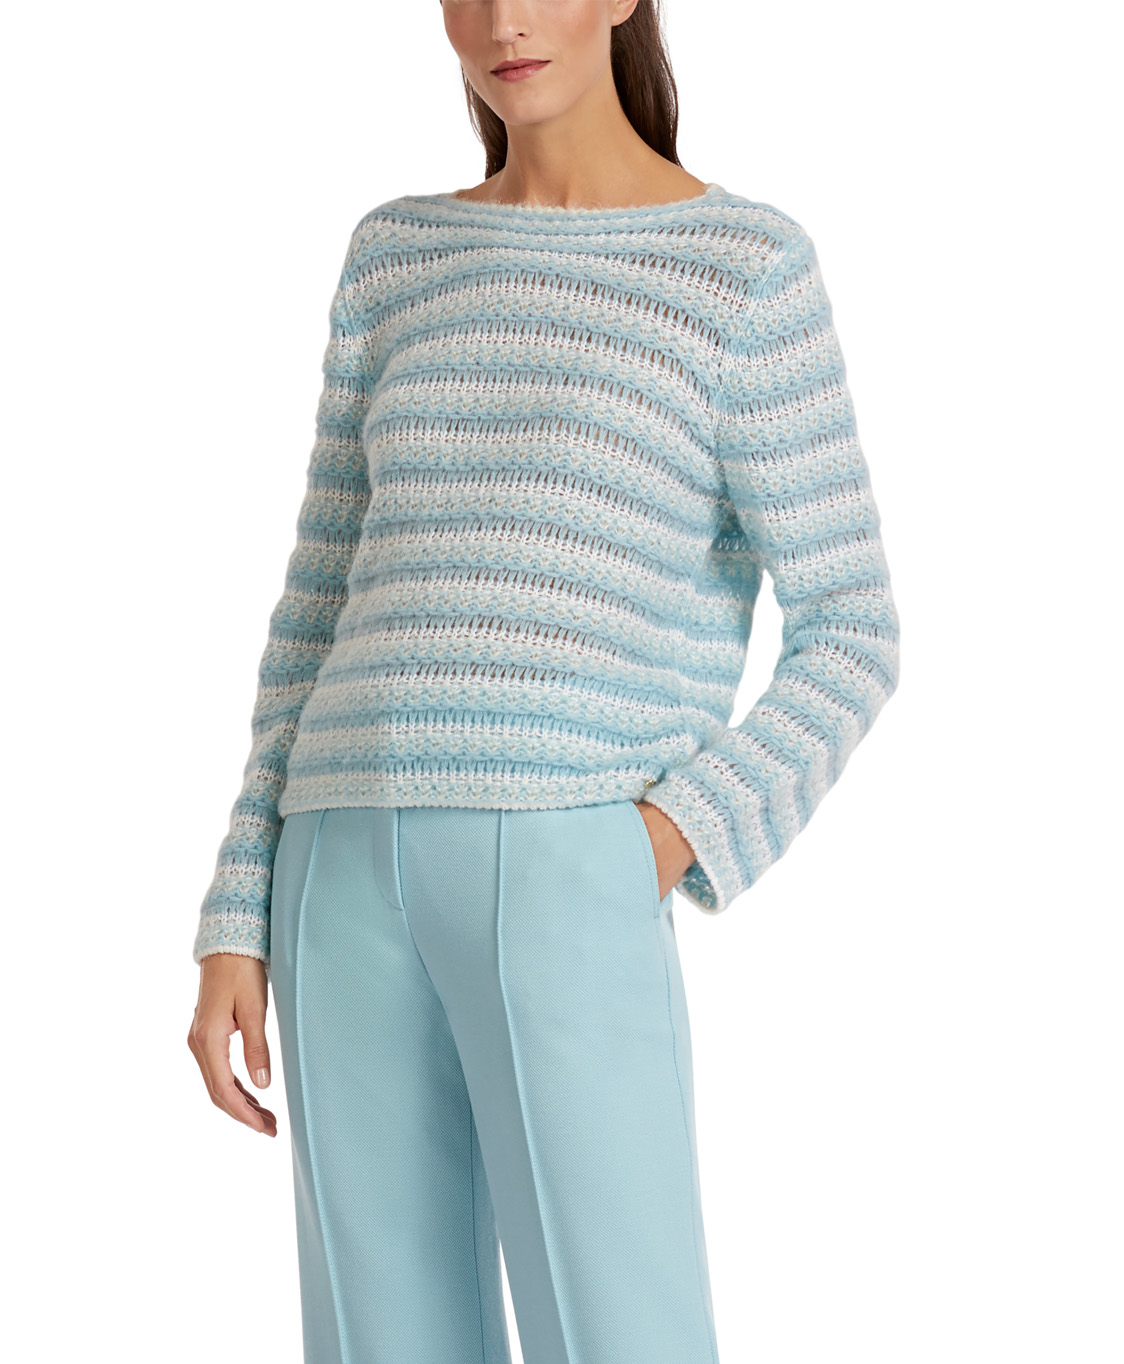 Marccain Collectie Pullover Uc 41.12 M02 Blauw